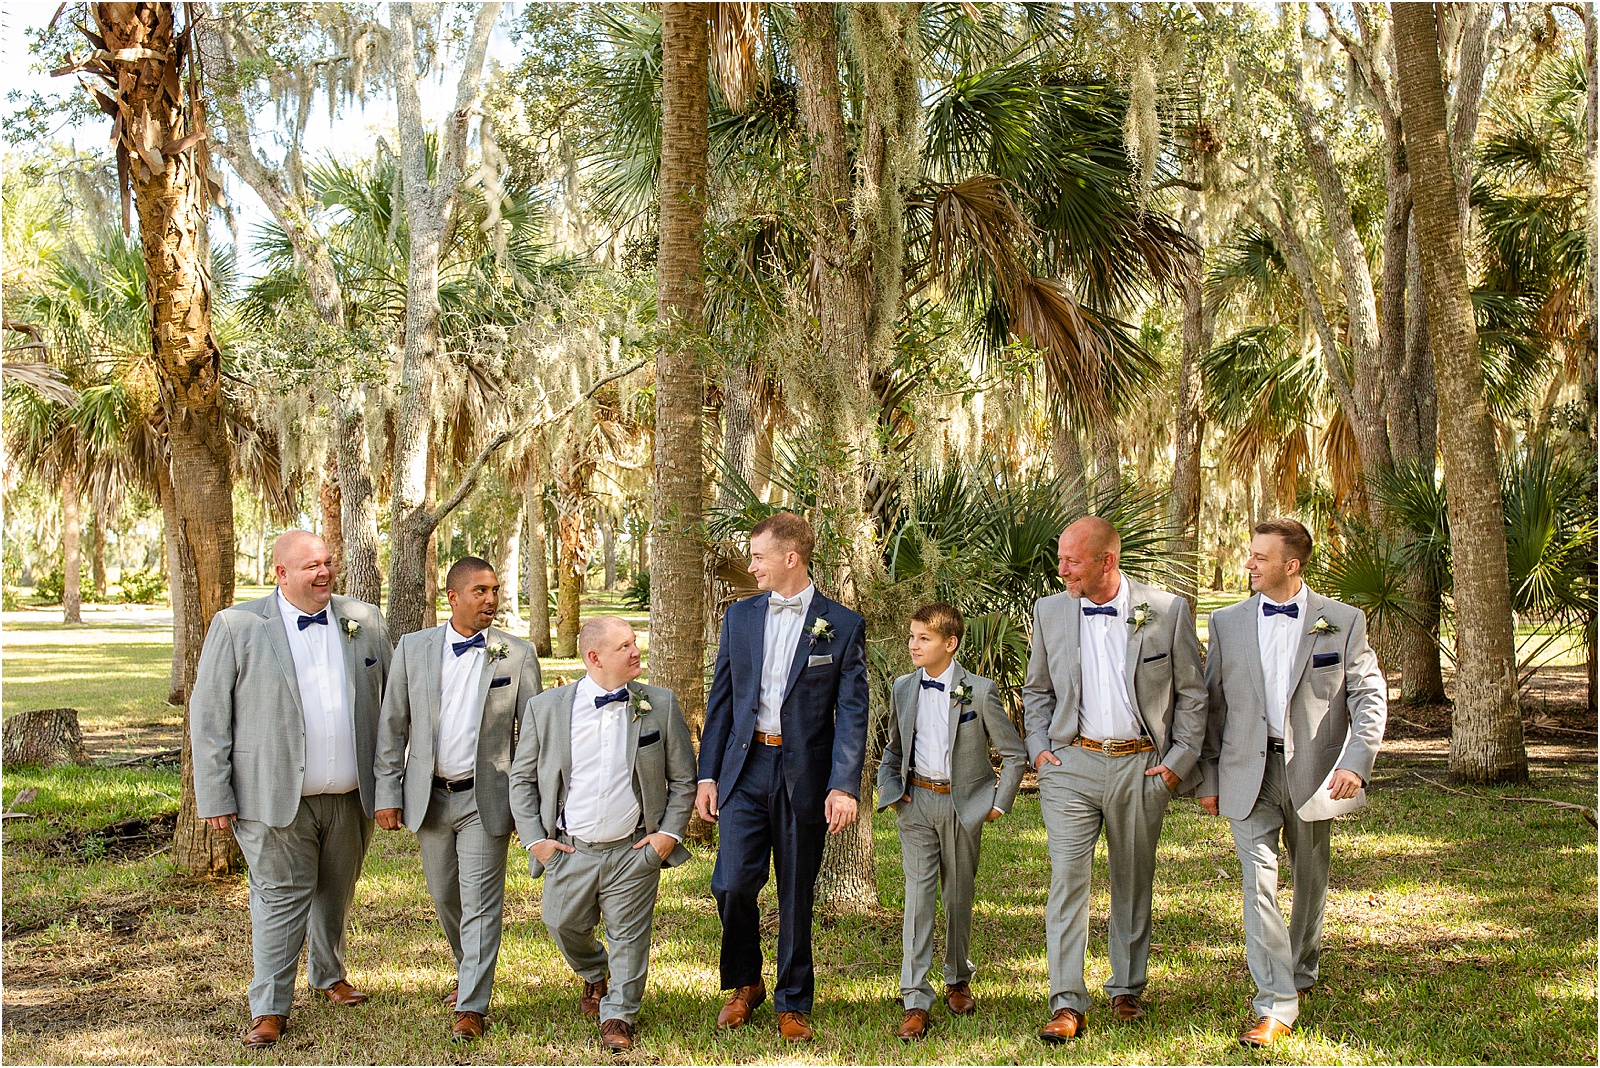 Groom looking at his groomsmen and laughing while they walk together